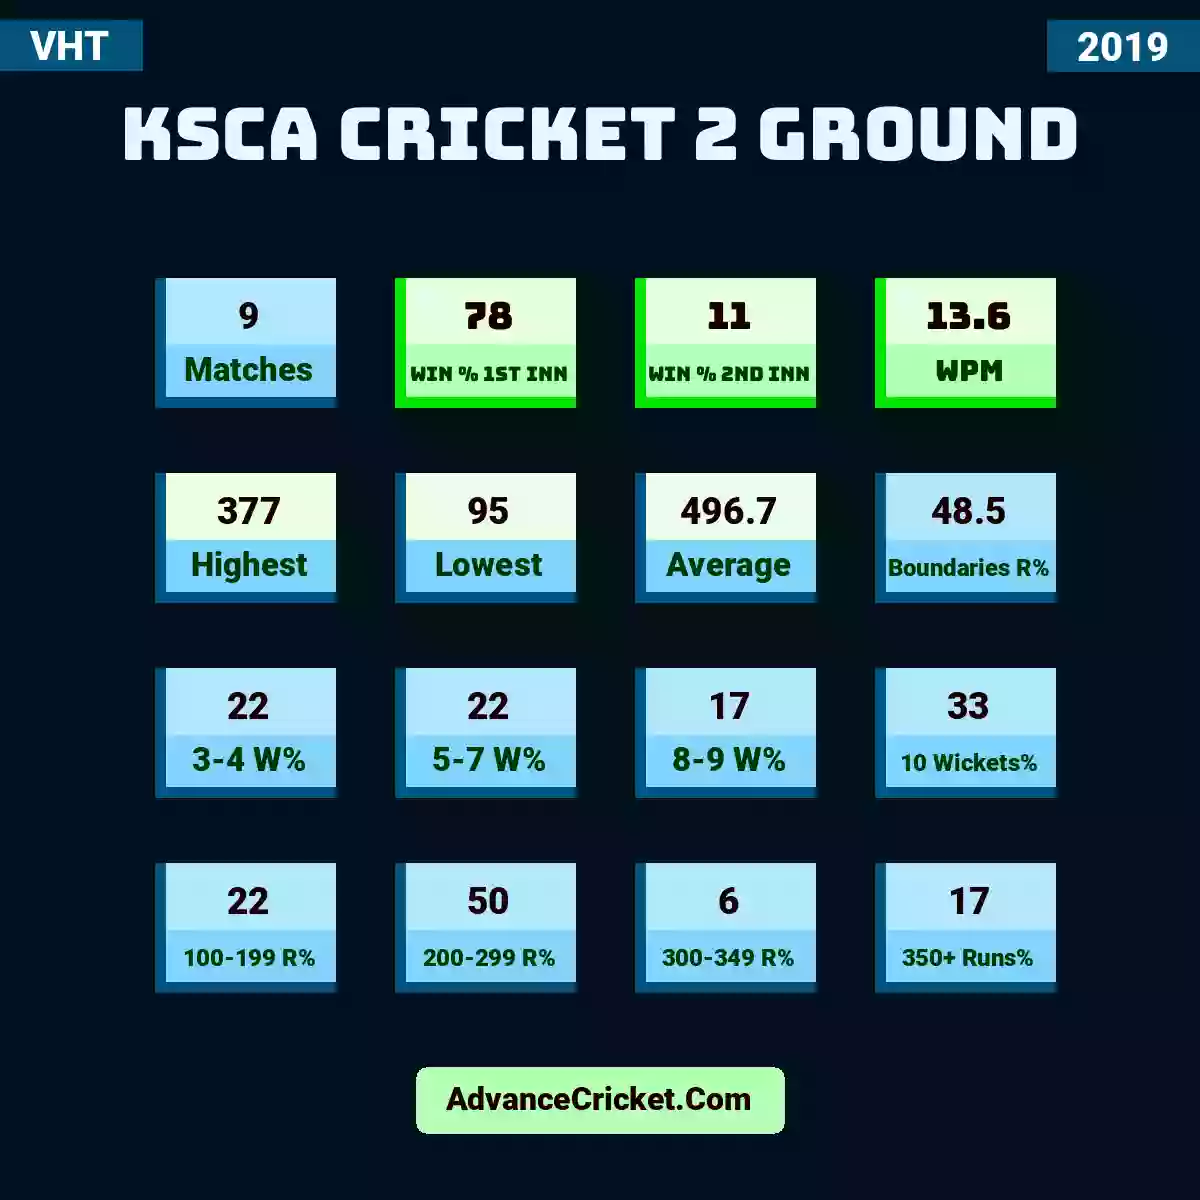 Image showing KSCA Cricket 2 Ground with Matches: 9, Win % 1st Inn: 78, Win % 2nd Inn: 11, WPM: 13.6, Highest: 377, Lowest: 95, Average: 496.7, Boundaries R%: 48.5, 3-4 W%: 22, 5-7 W%: 22, 8-9 W%: 17, 10 Wickets%: 33, 100-199 R%: 22, 200-299 R%: 50, 300-349 R%: 6, 350+ Runs%: 17.